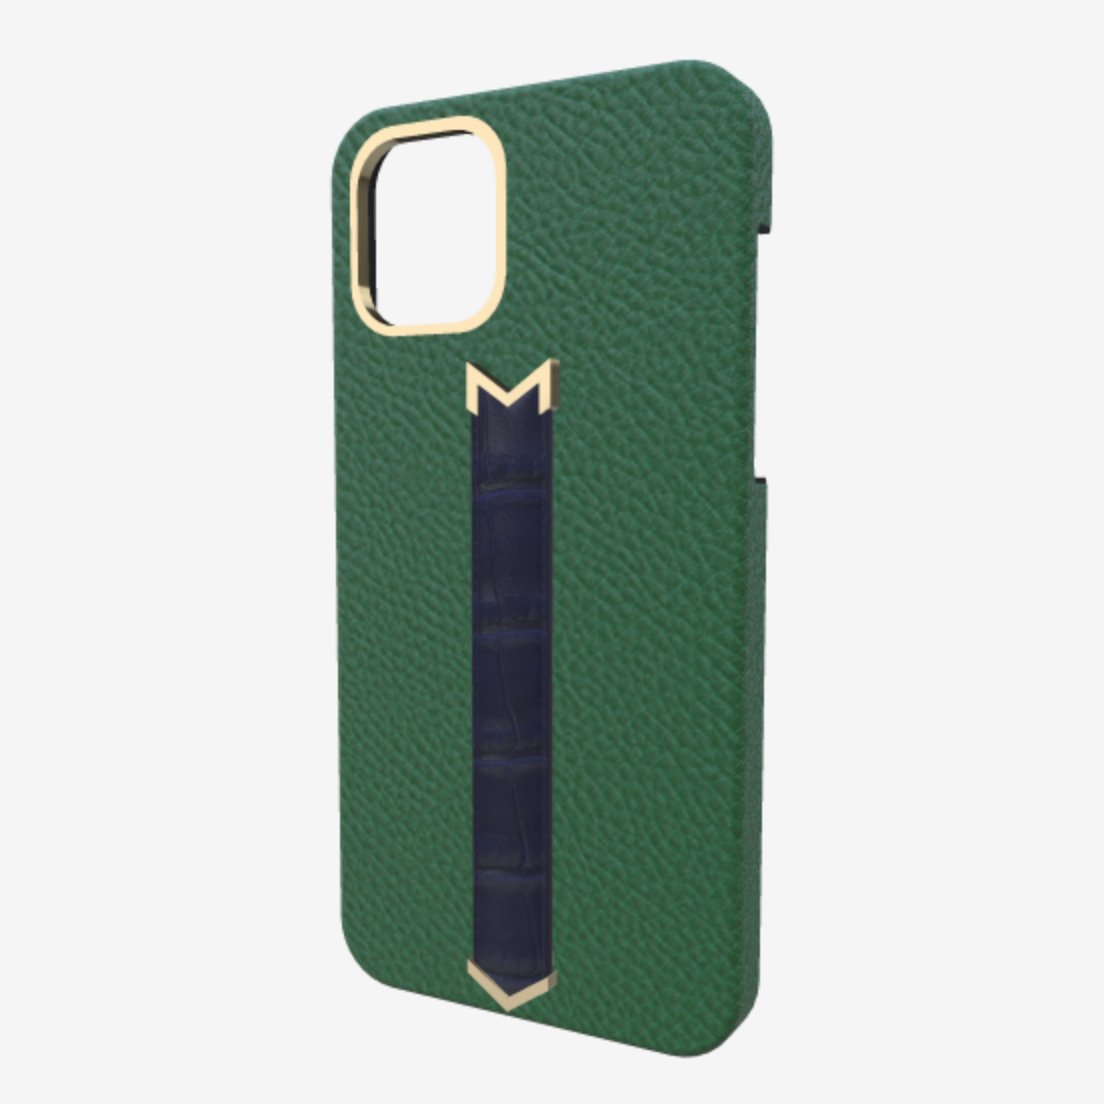 Gold Finger Strap Case for iPhone 13 Pro Max in Genuine Calfskin and Alligator 